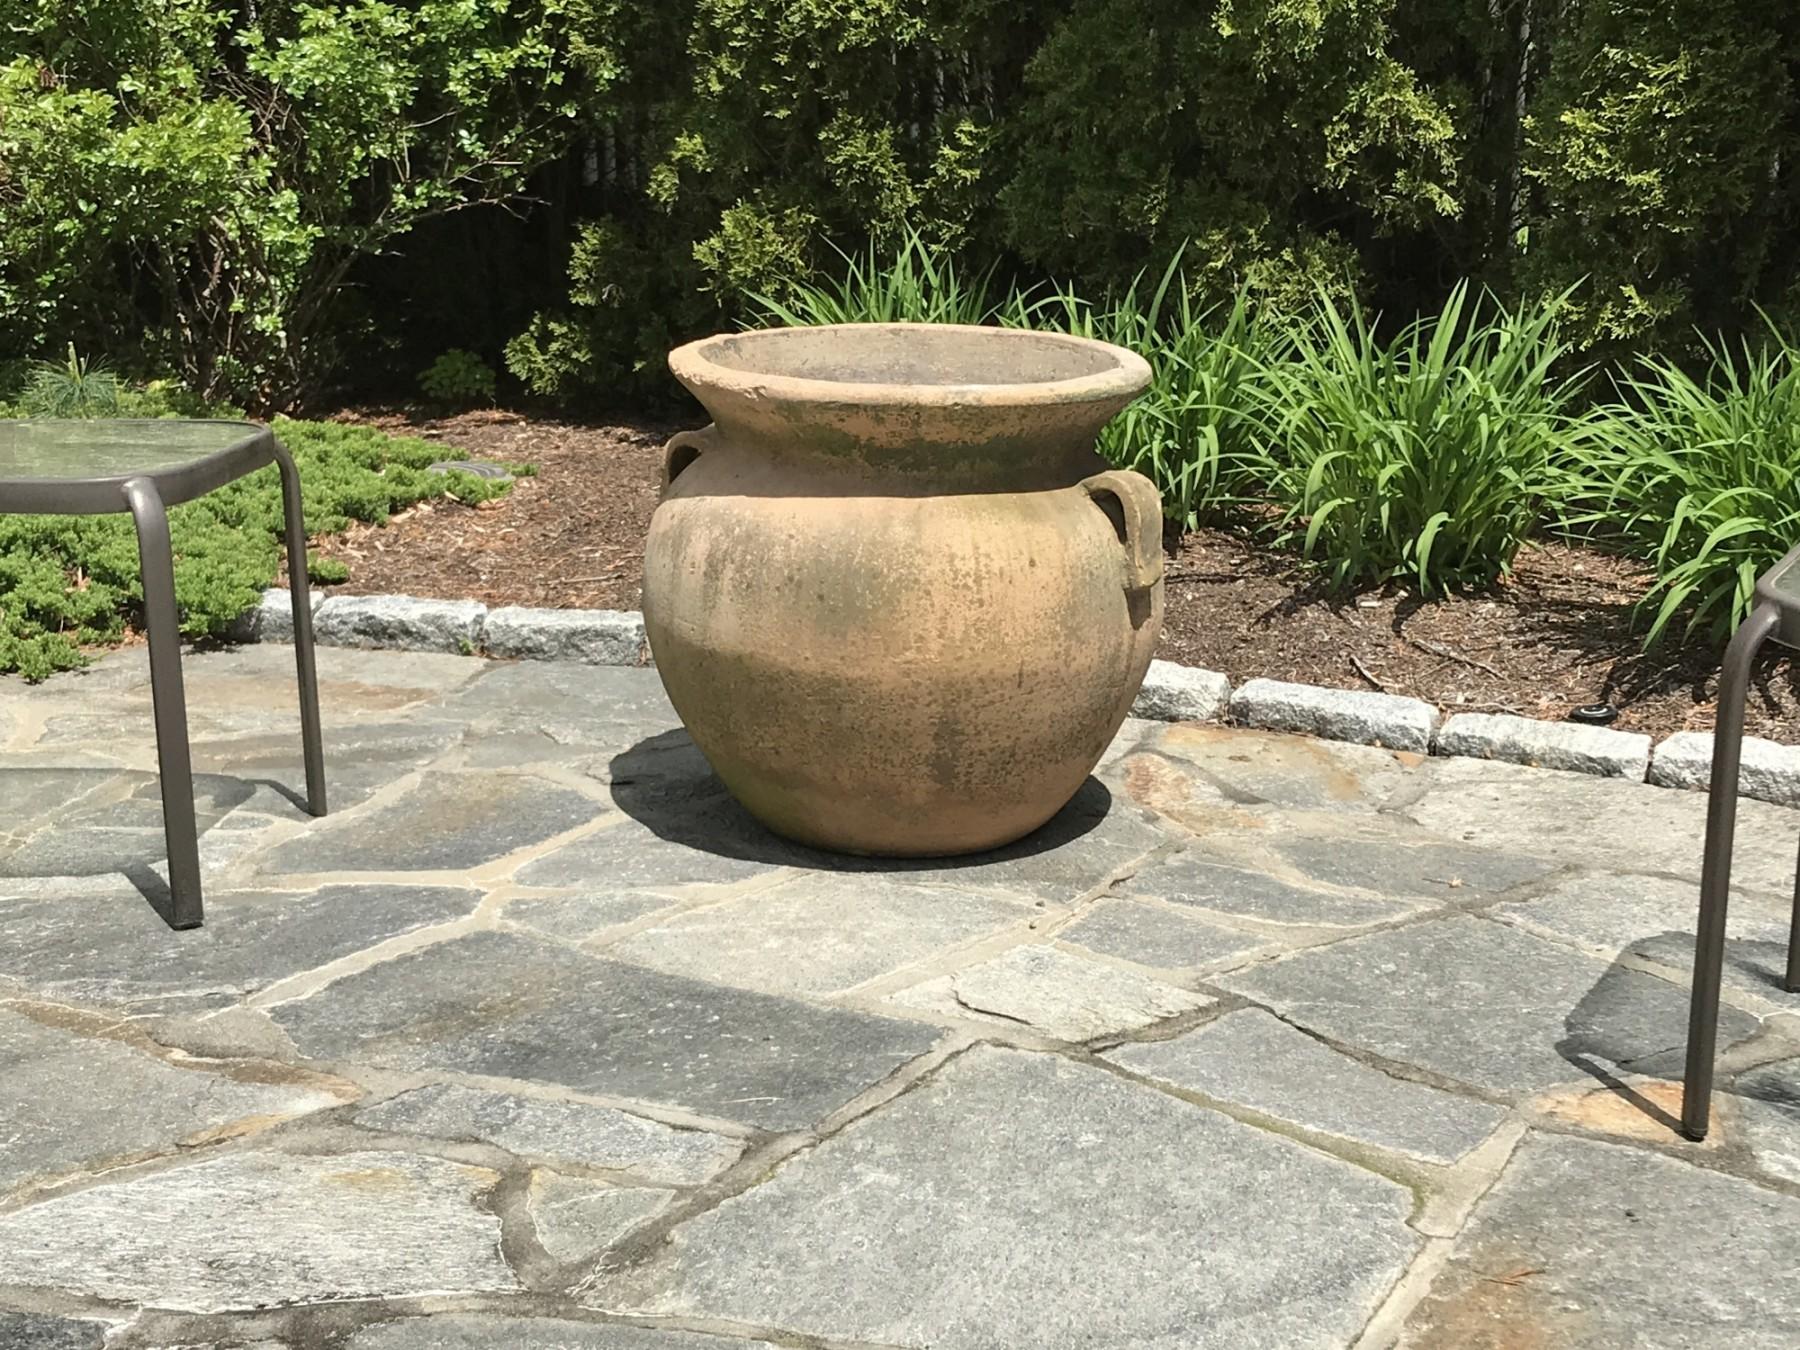 Large but strikingly well-proportioned midcentury terracotta garden urn, neoclassical krater-esque form, elegant belly and charming cupped handles. Desirable patina and just a stunning piece for the lanai, English garden, Italianate Palladio.